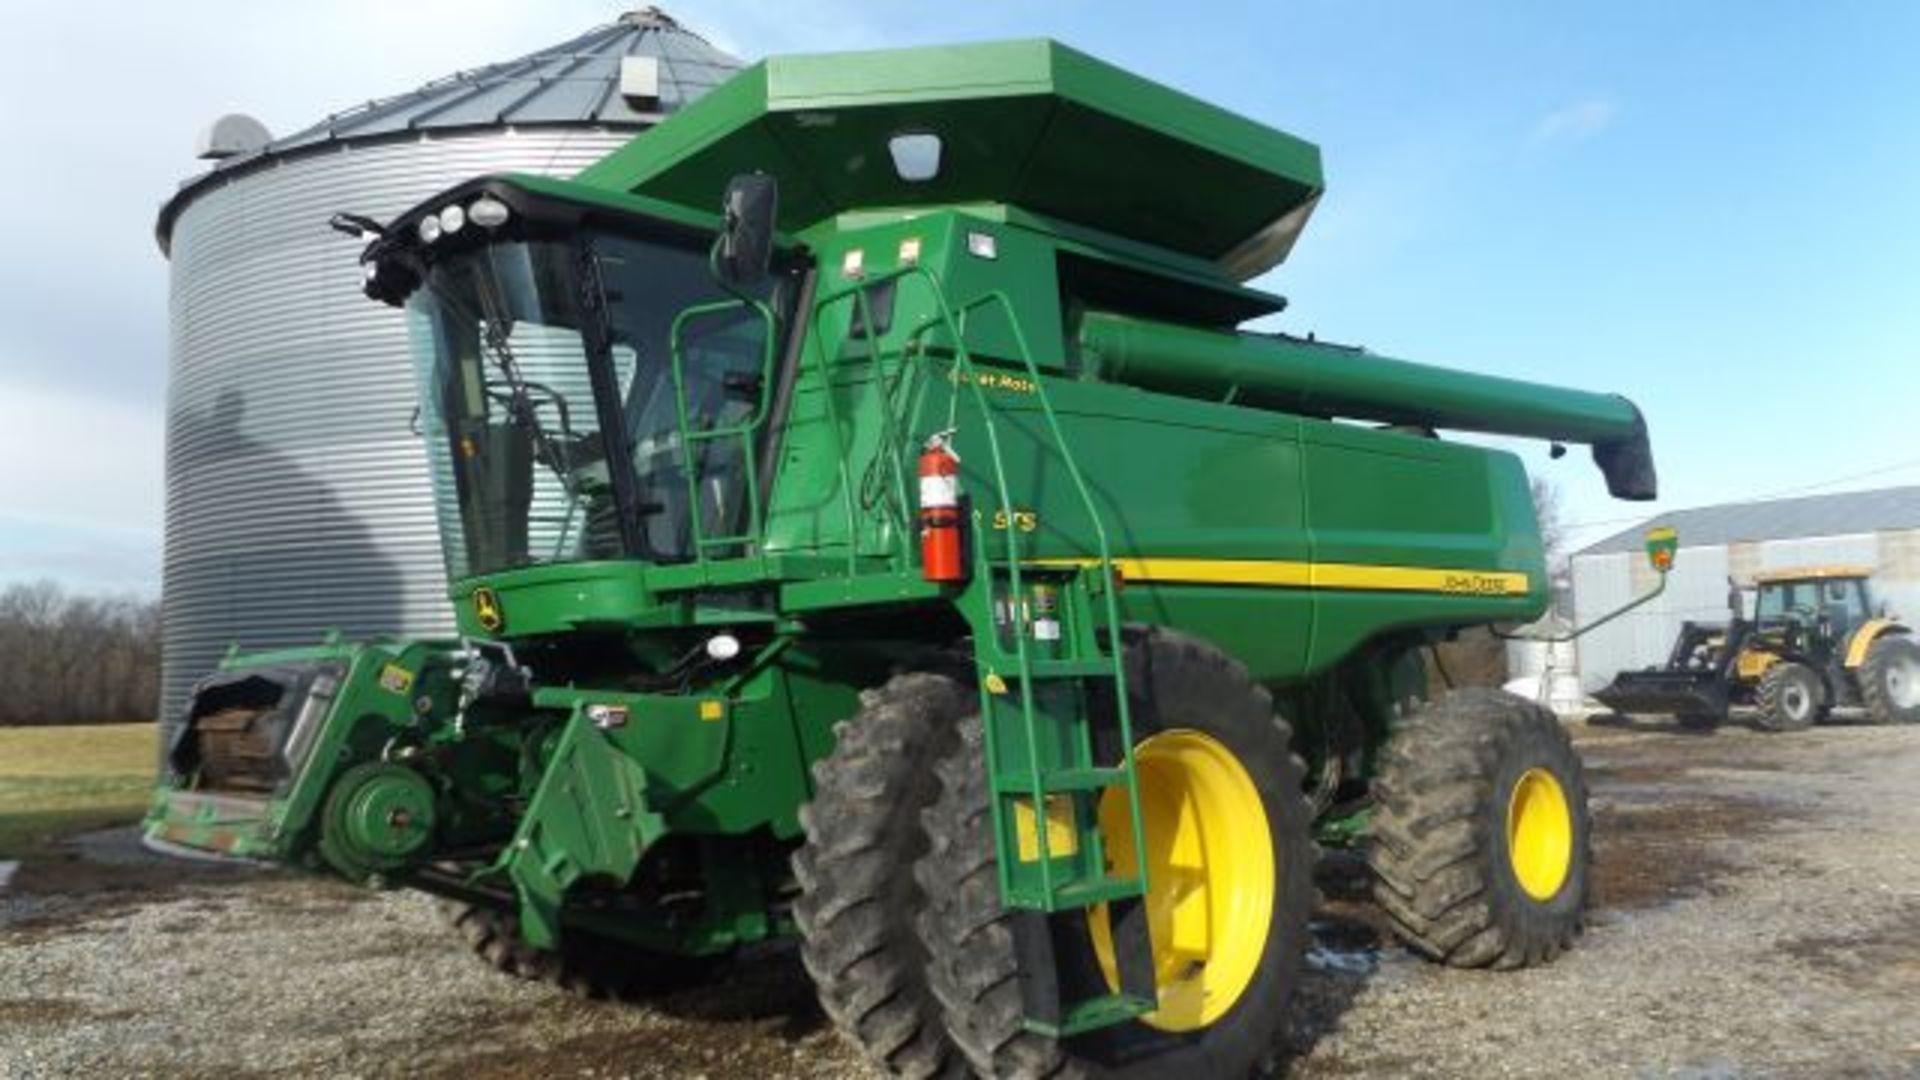 2009 JD 9770 Combine, 1475/1150 Hrs., Contour Master, 4wd, Extended Wear Concaves, High Capacity